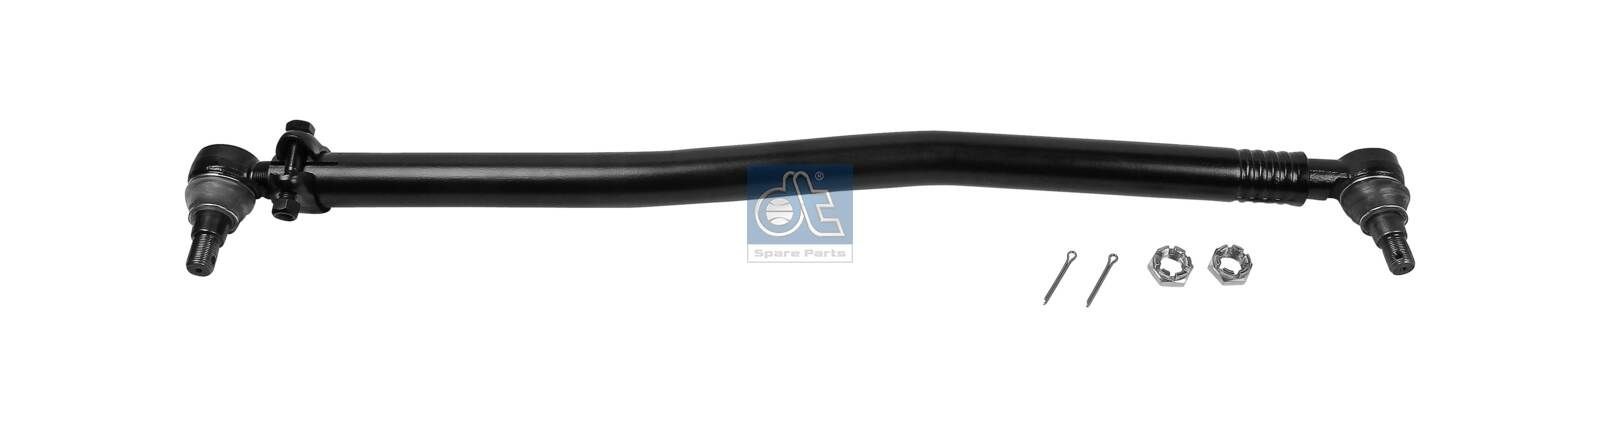 DT Spare Parts 4.67419 Rod Assembly 003 460 58 05